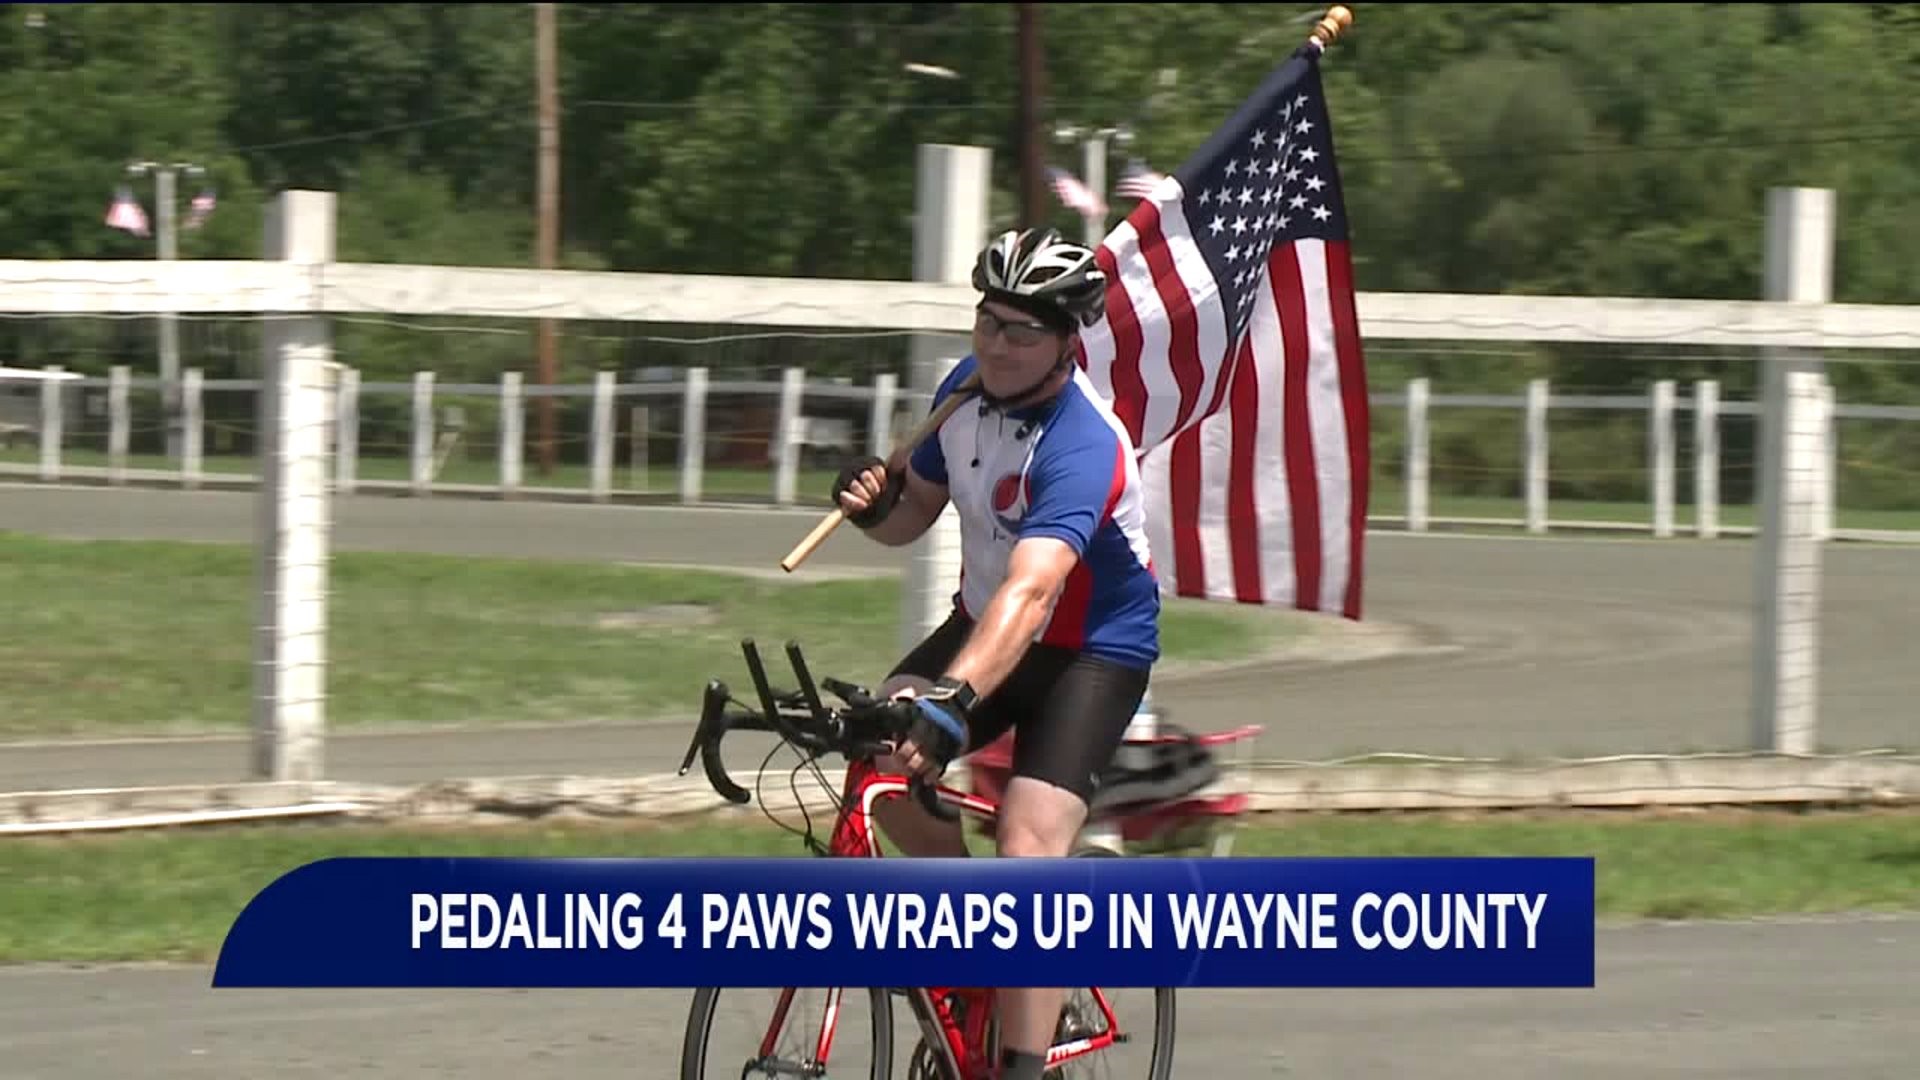 Bicyclist Rolls Into Home Stretch of Charity Ride